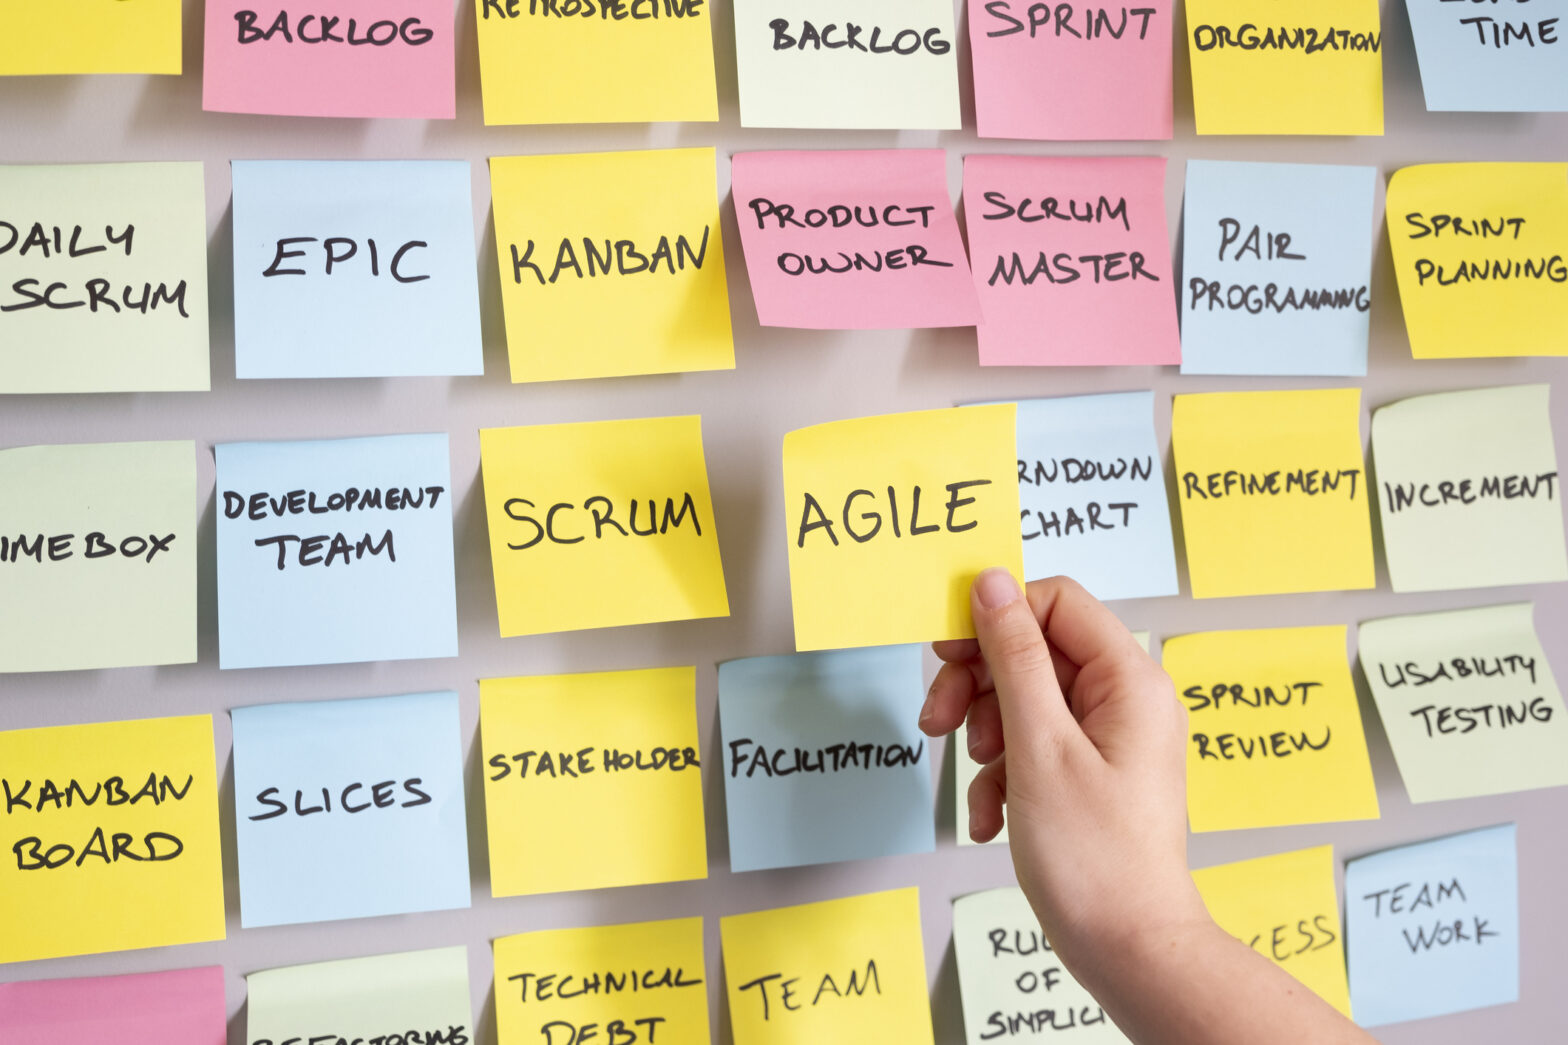 Agile board with sticky notes